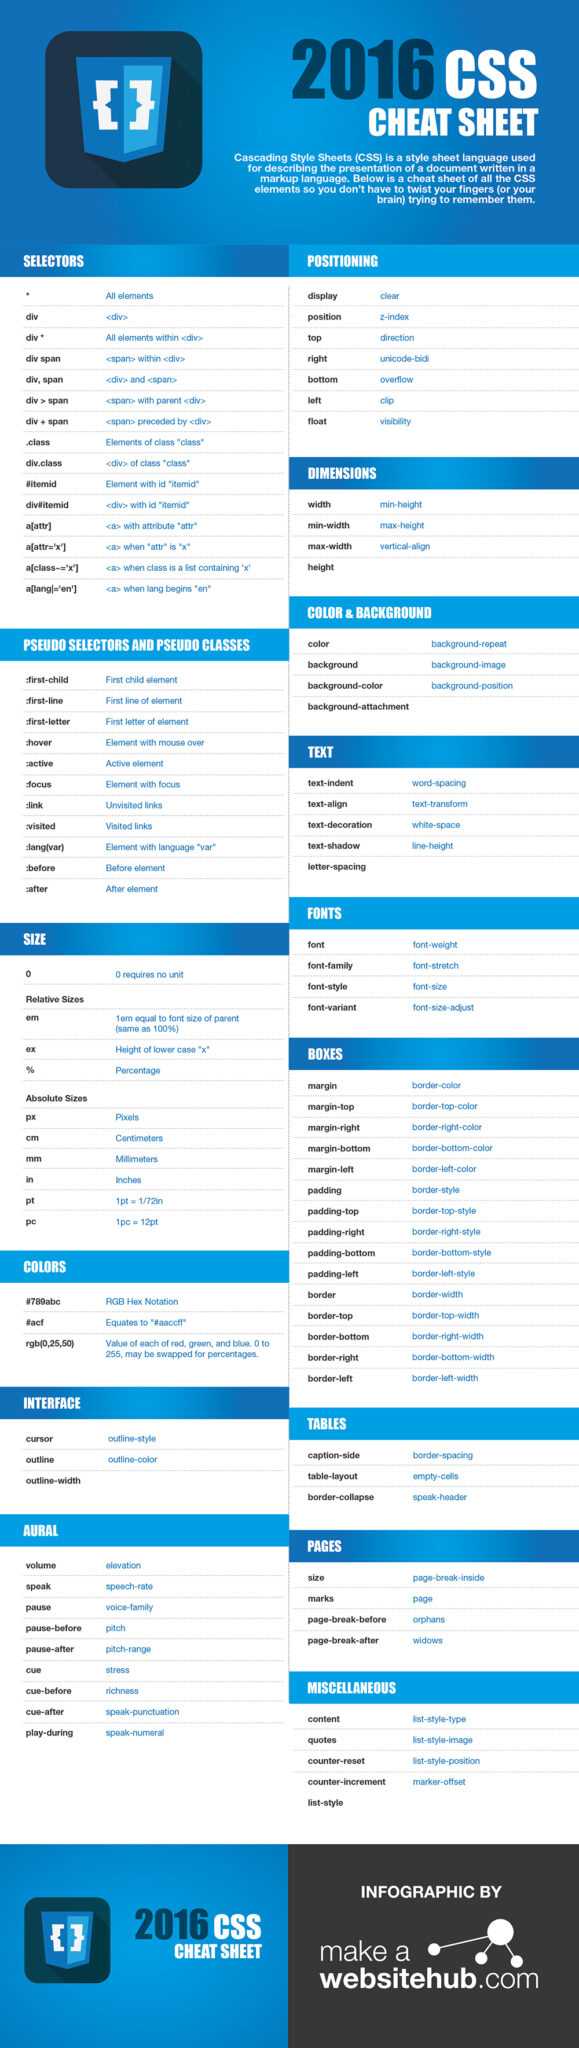 120-great-cheat-sheets-for-wordpress-web-developers-and-within-cheat